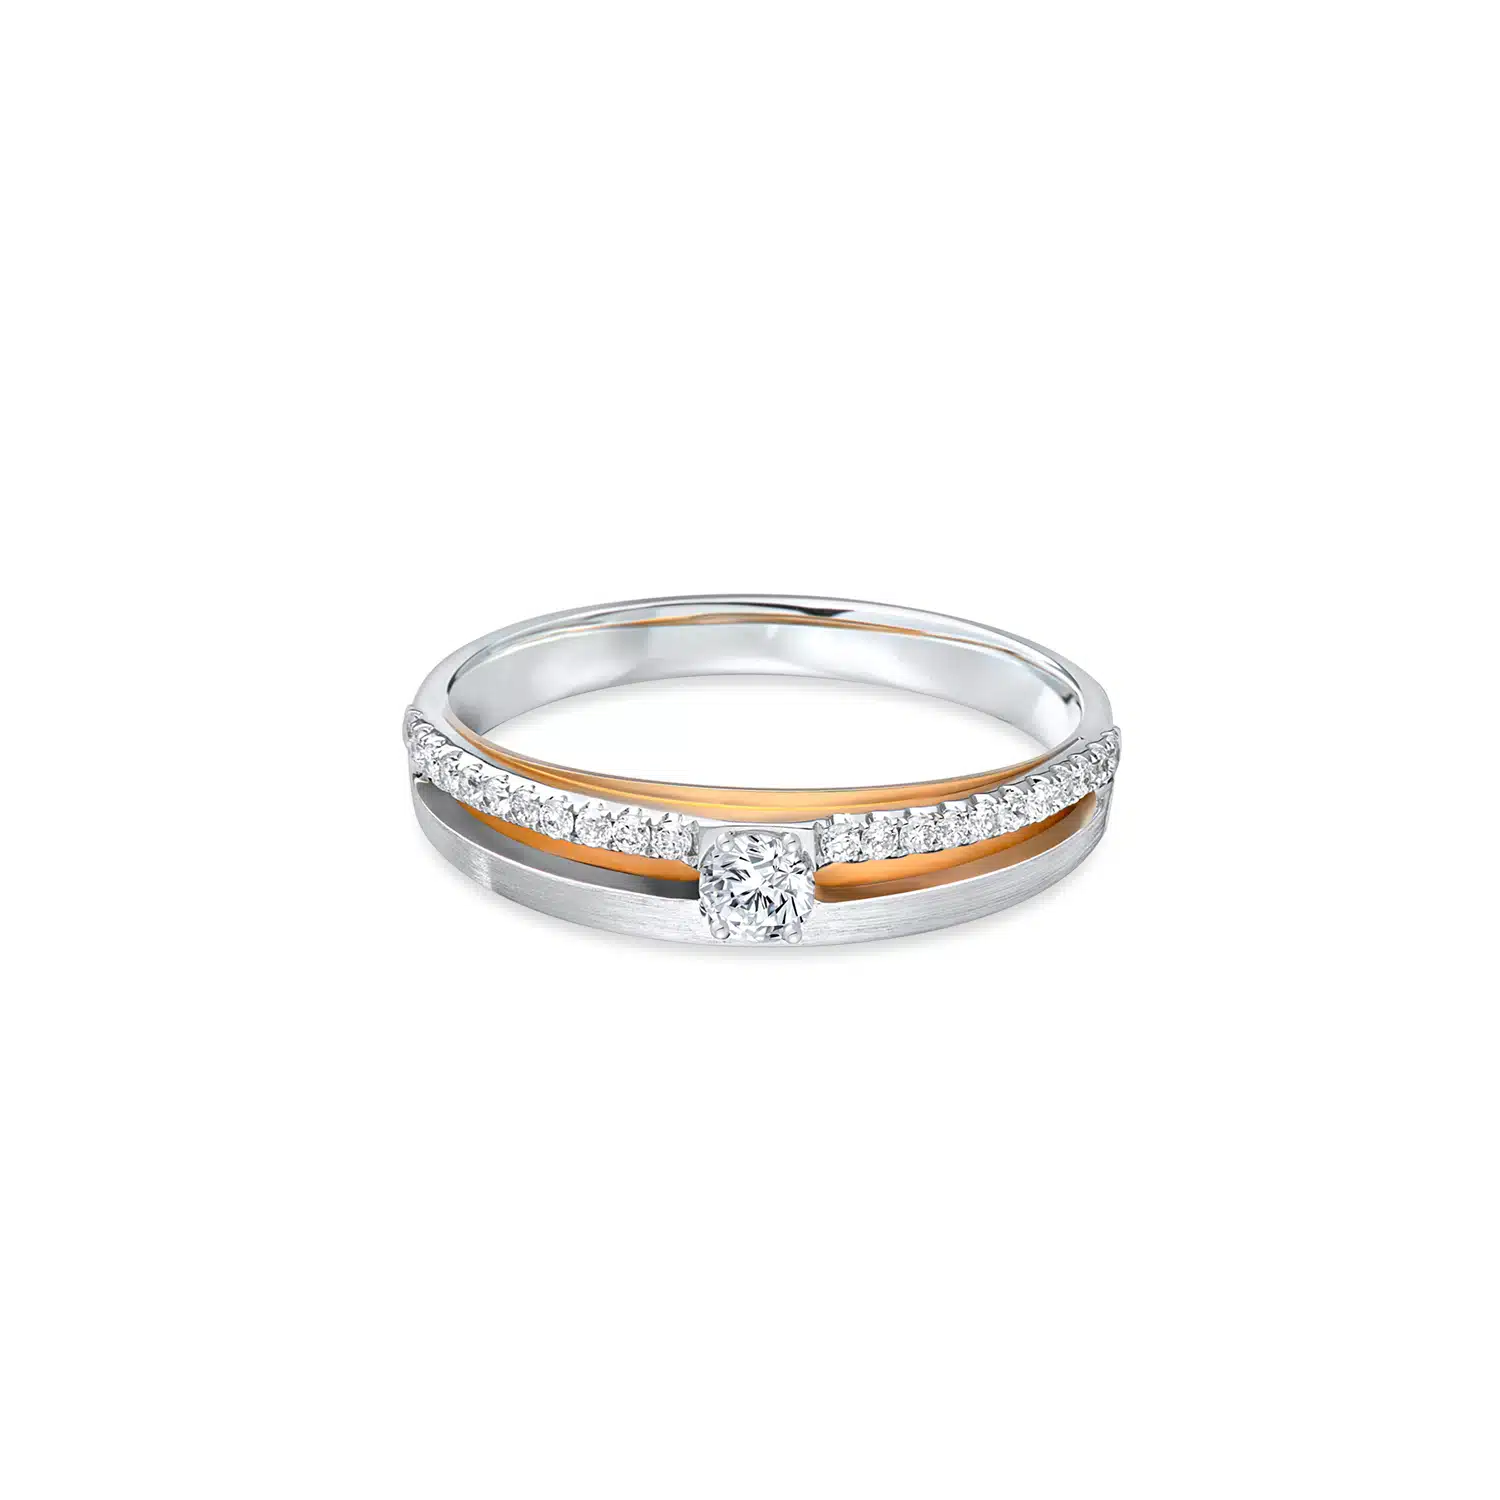 TRUE LOVE ONE AND ONLY perfect for your one and only 18k WHITE GOLD WEDDING BAND